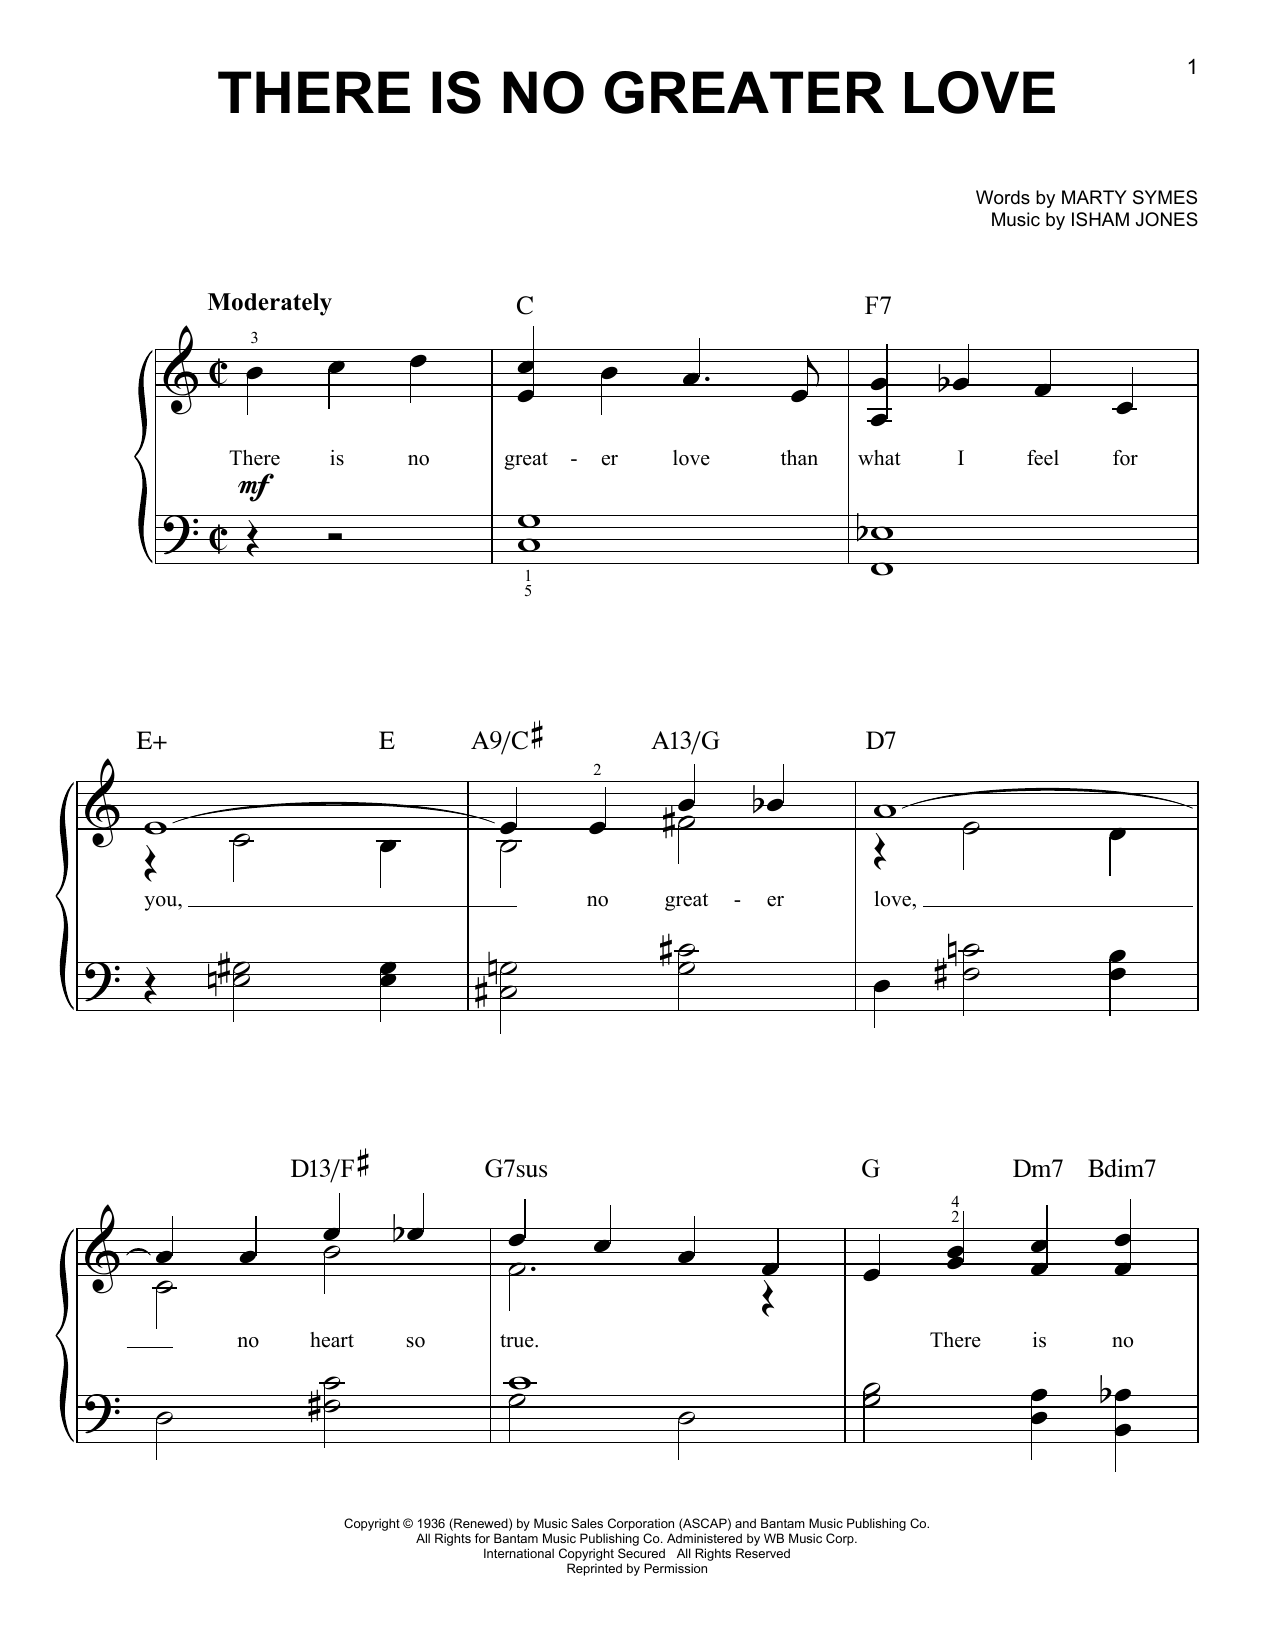 Download Marty Symes There Is No Greater Love Sheet Music